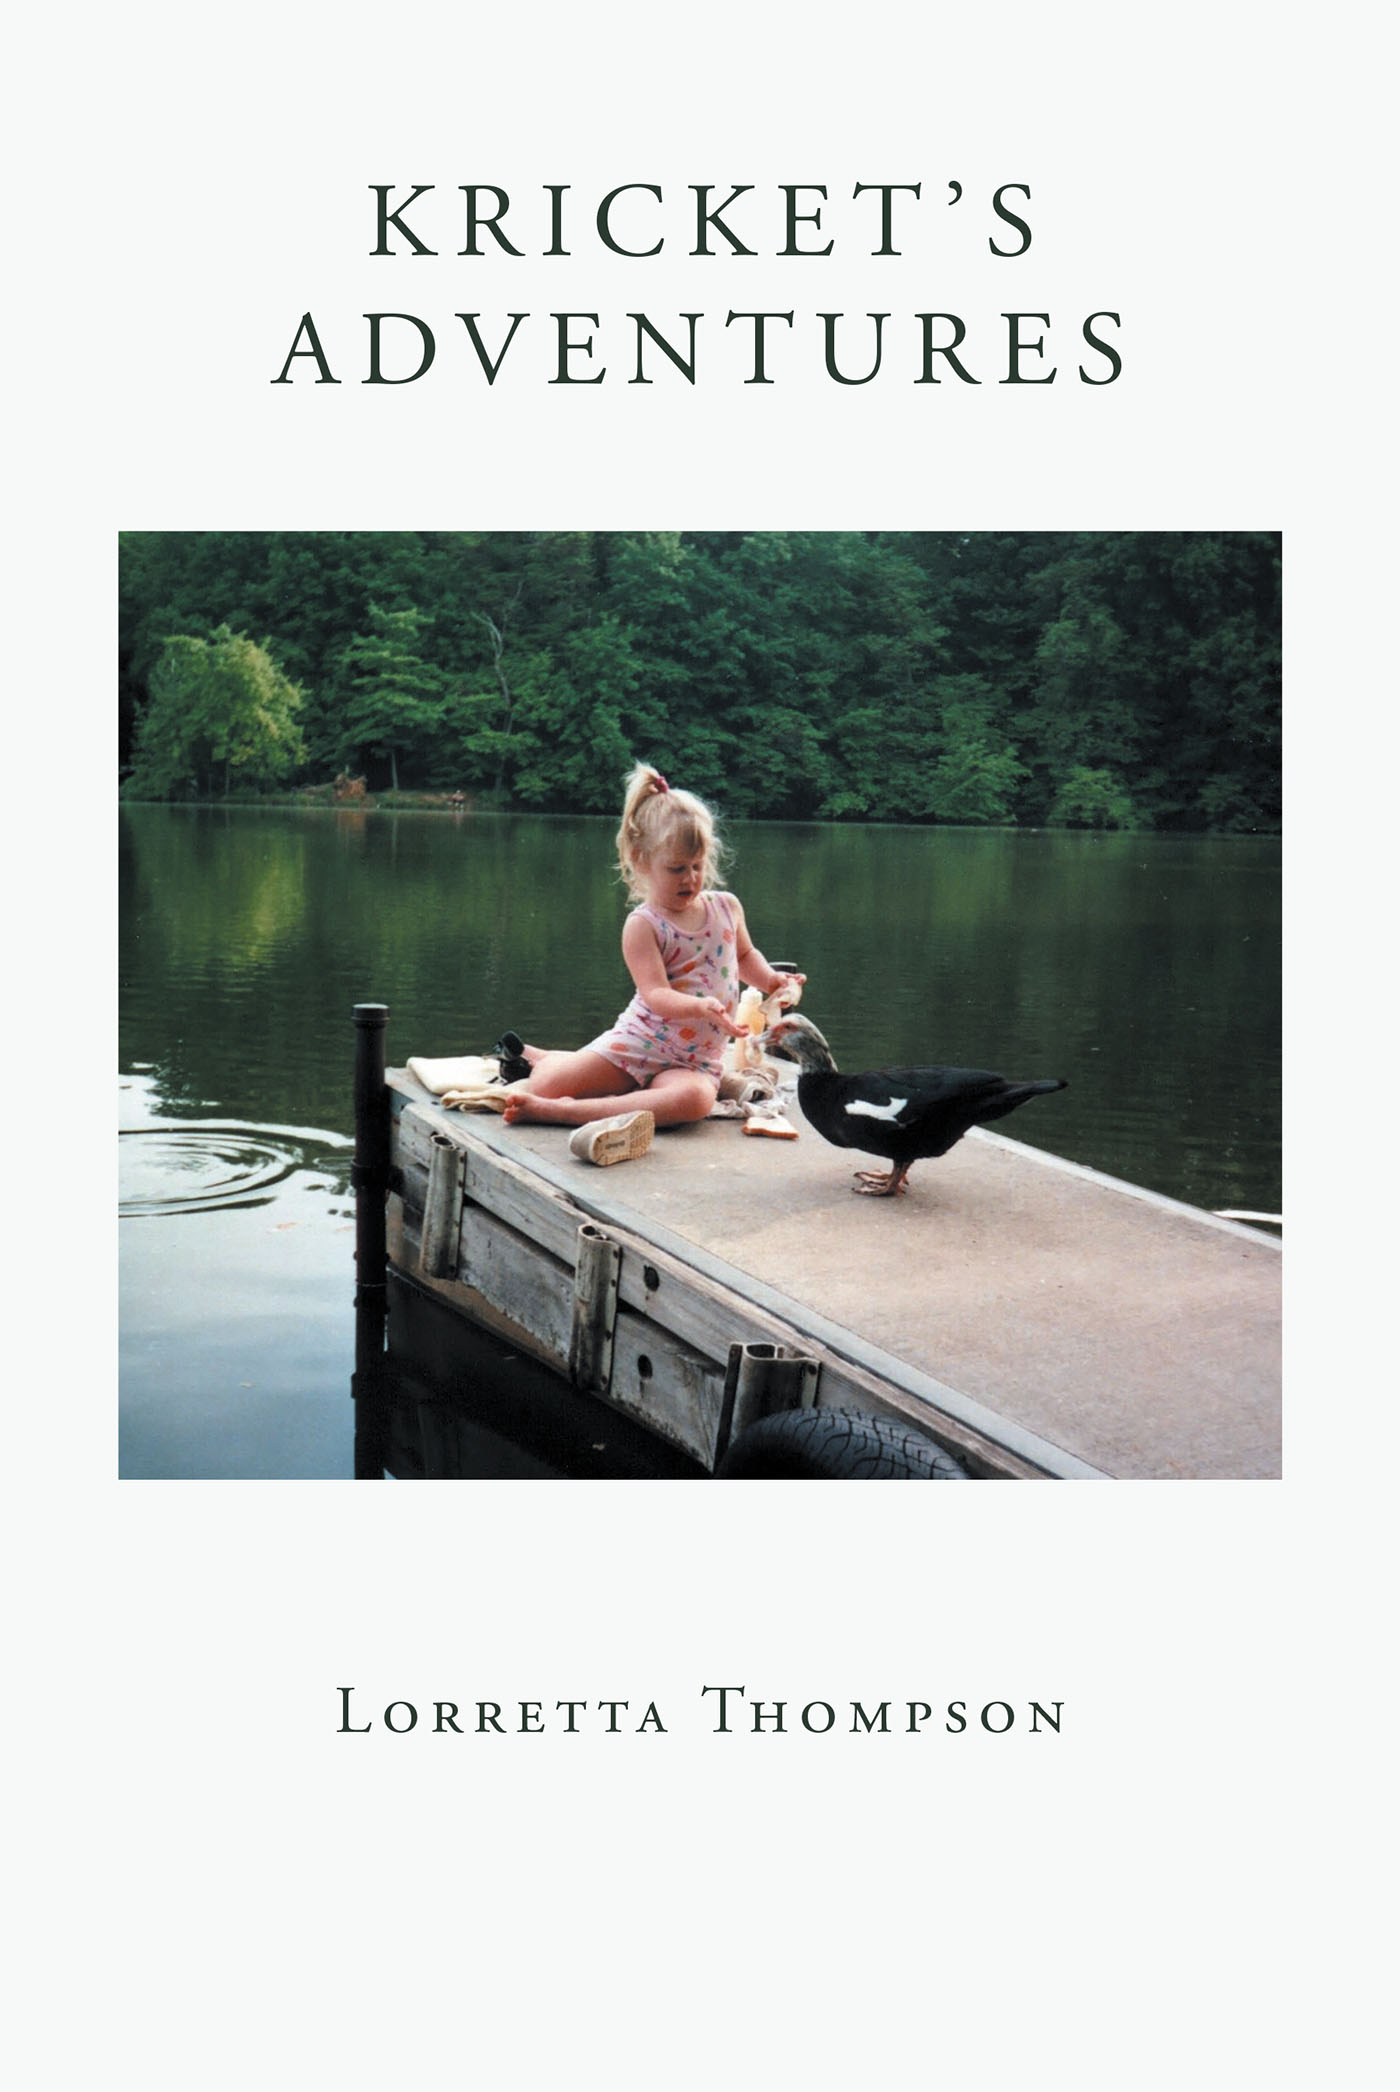 Author Lorretta Thompson’s New Book, "Kricket’s Adventures," is the Story of the First Five Years of Her Daughter’s Life and the Wonderful Adventures They Had Together